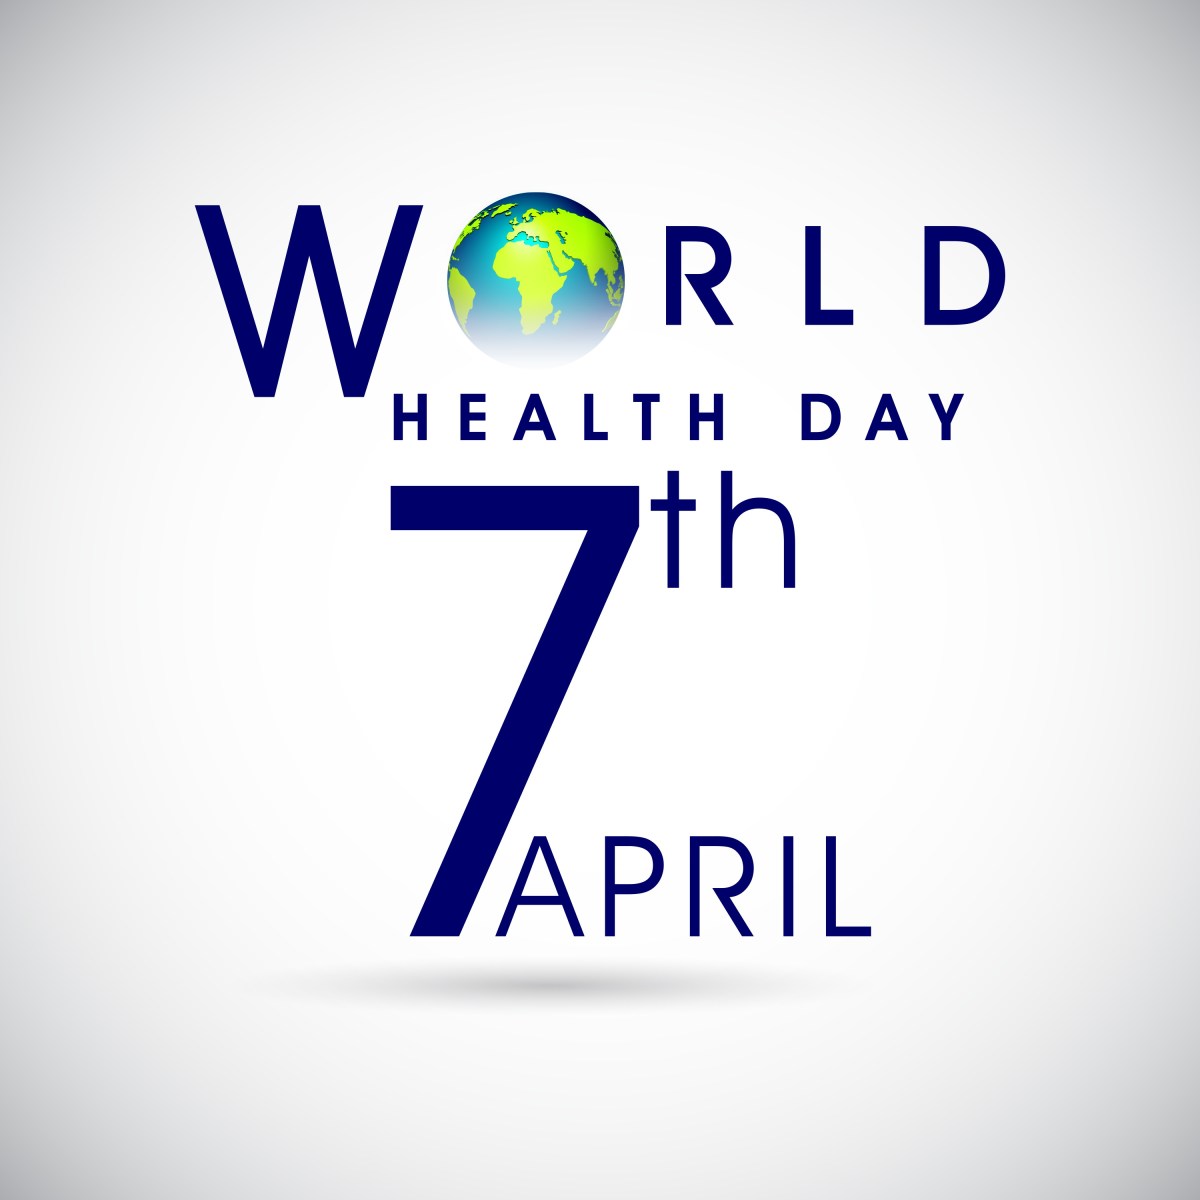 ‘World Health Day’: Our Planet, Our Health